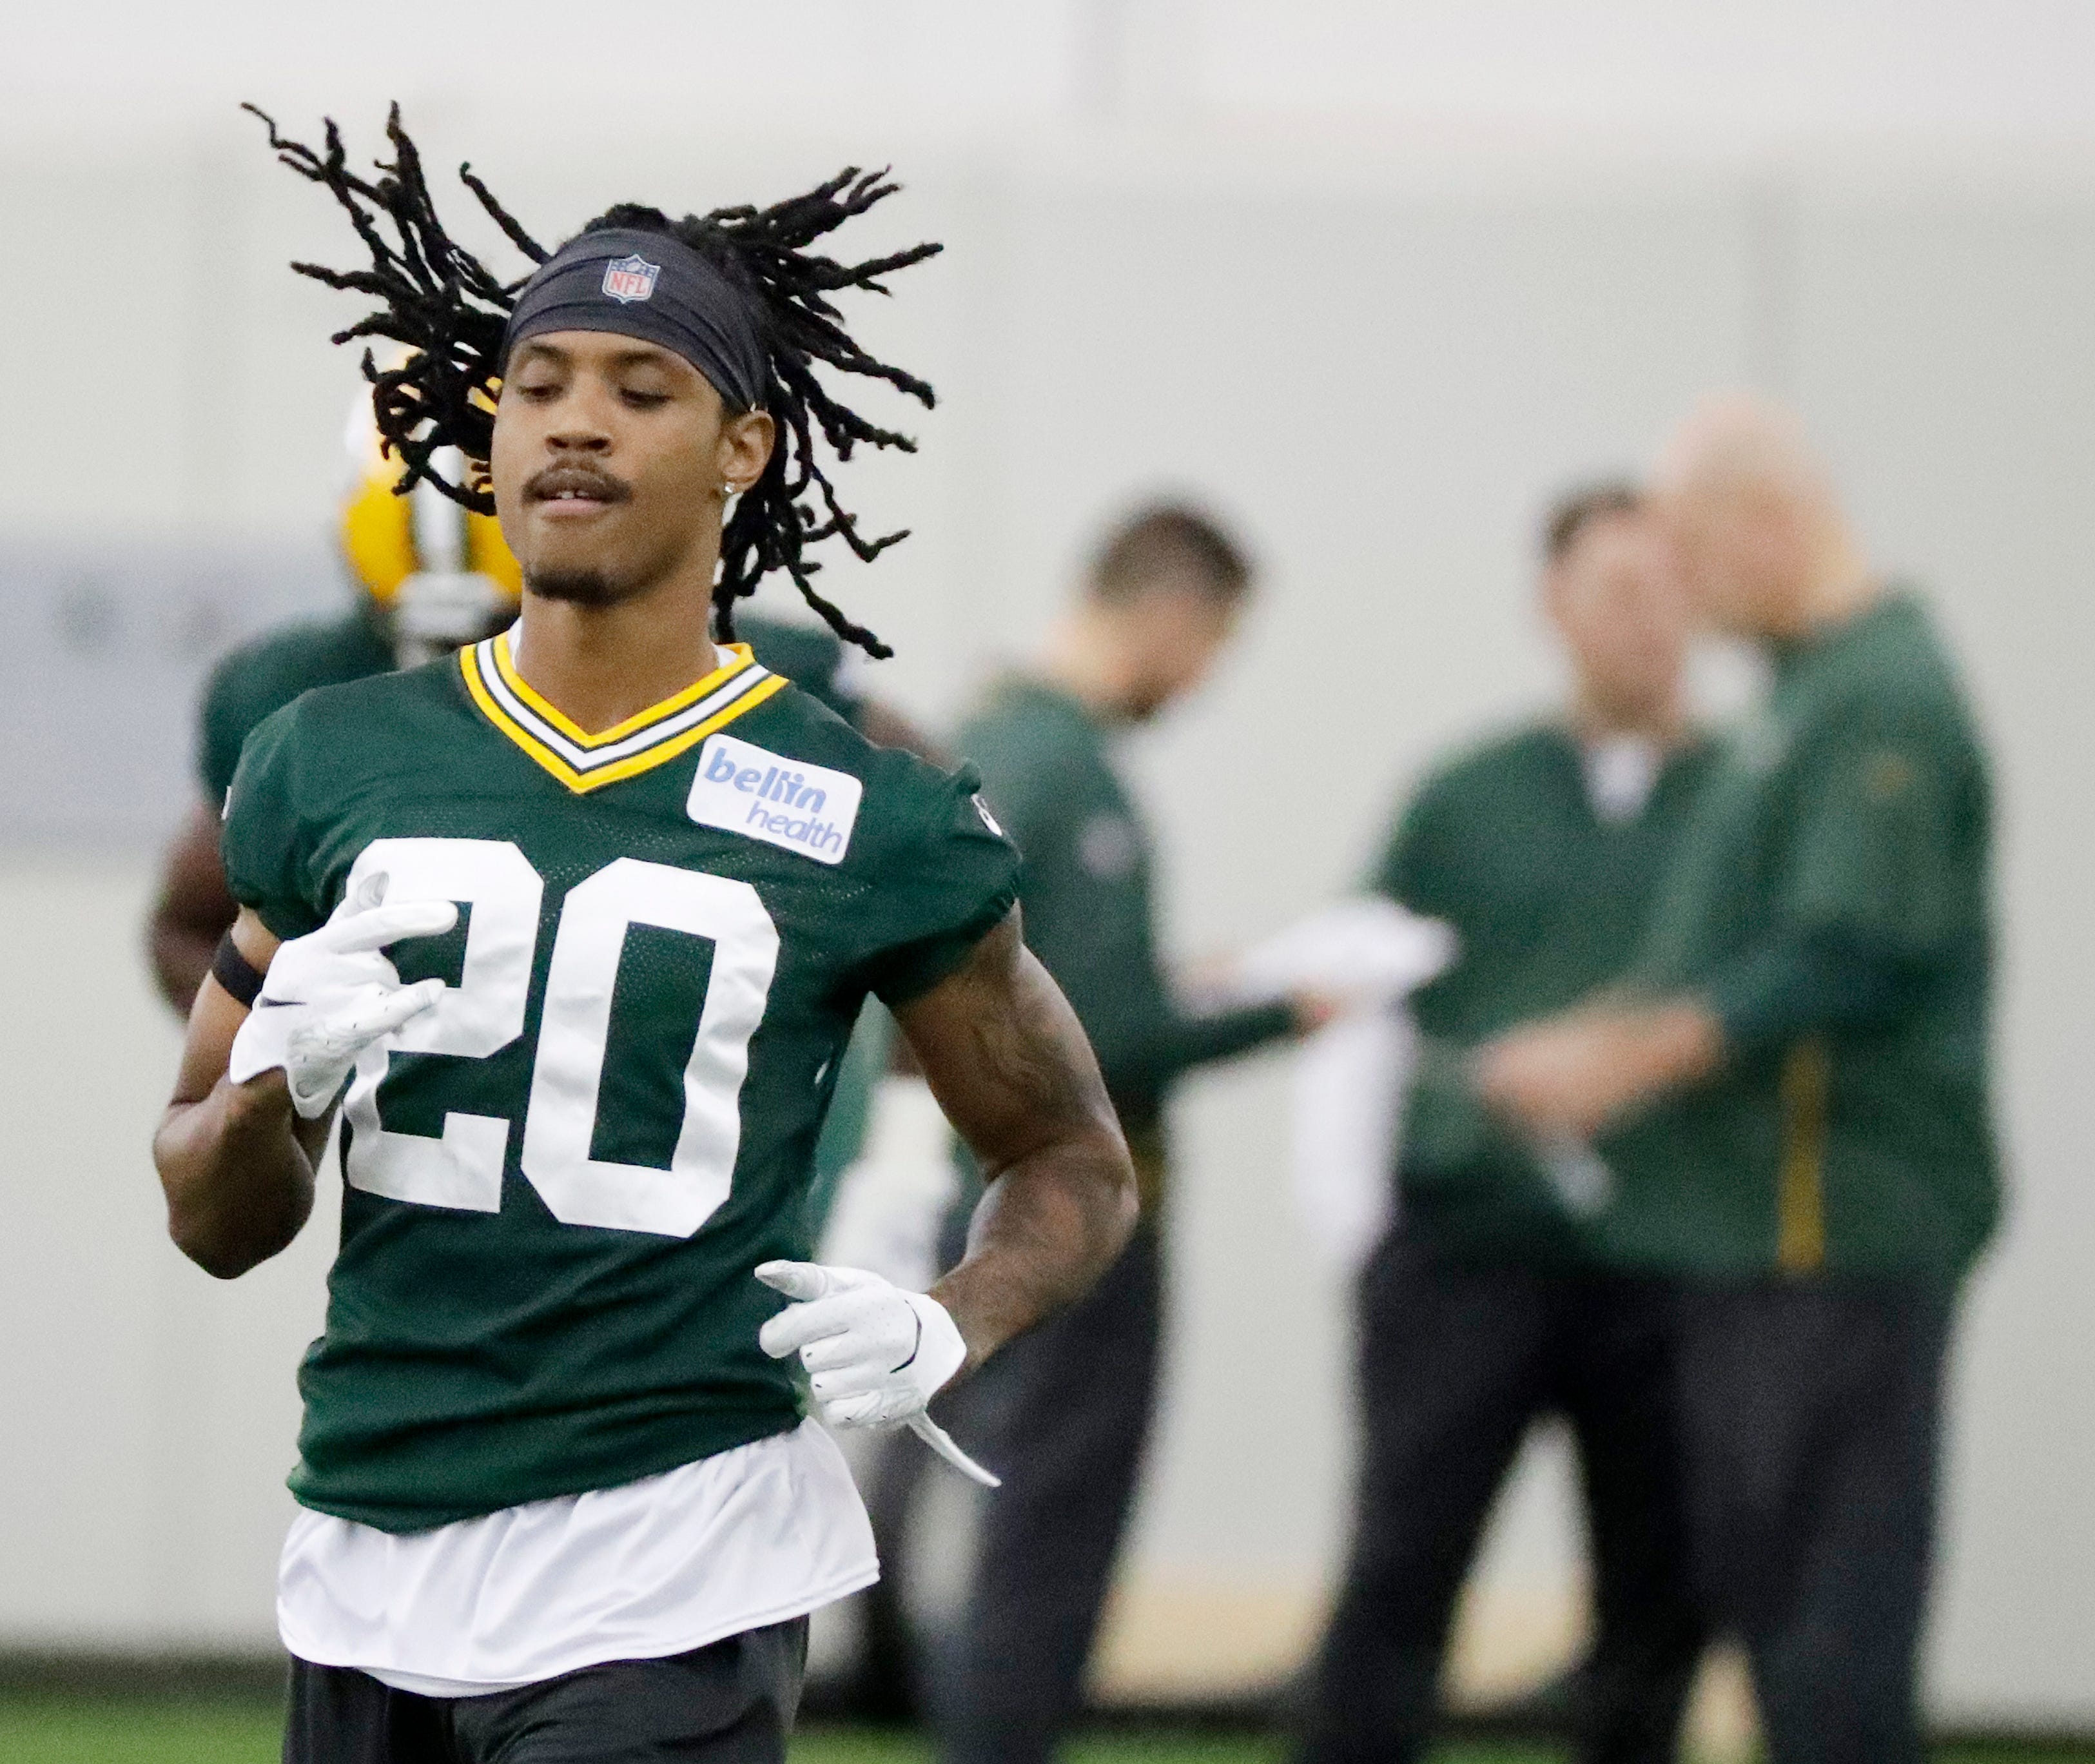 Green Bay Packers cornerback Kevin King (20) warms up during a team practice at the Don Hutson Center on Wednesday, April 24, 2019 in Ashwaubenon, Wis.